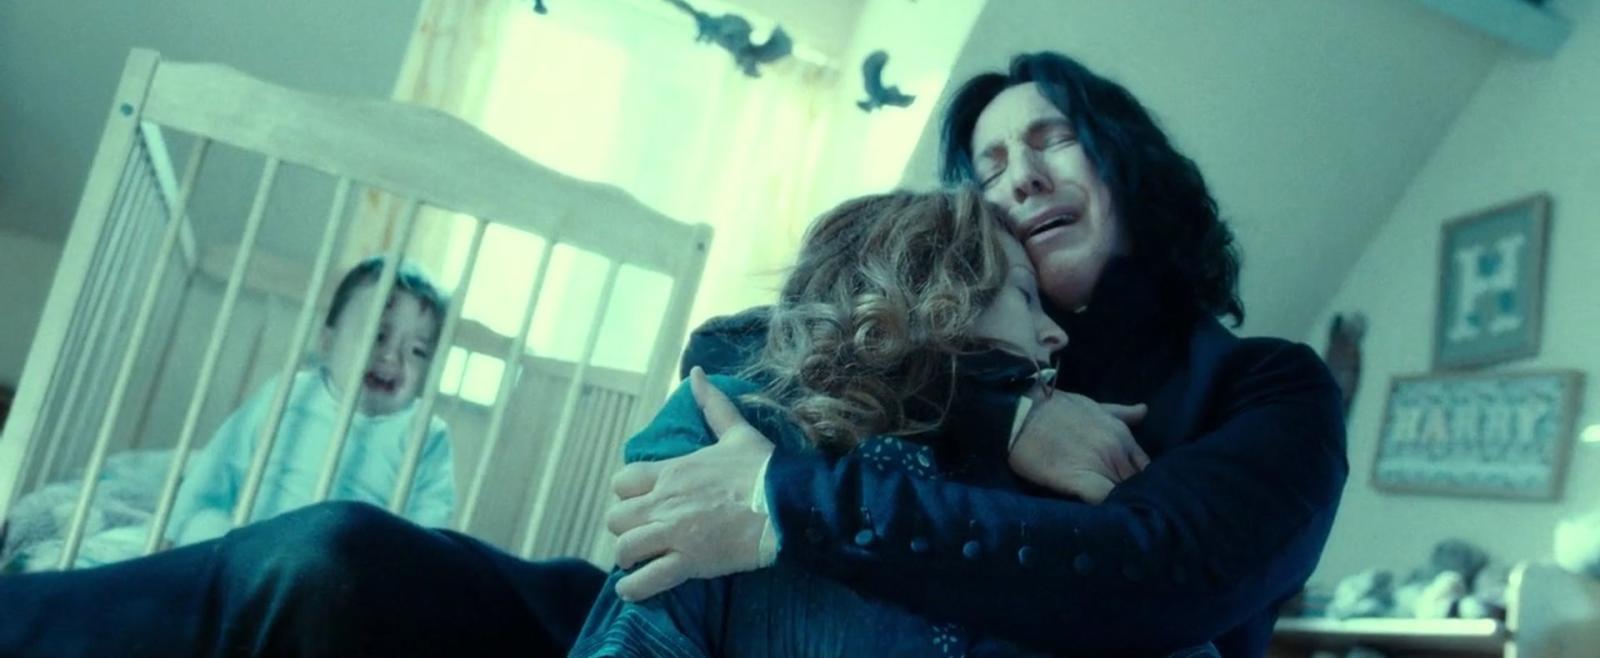 The 8 Most Overrated Moments in the Harry Potter Series - image 3